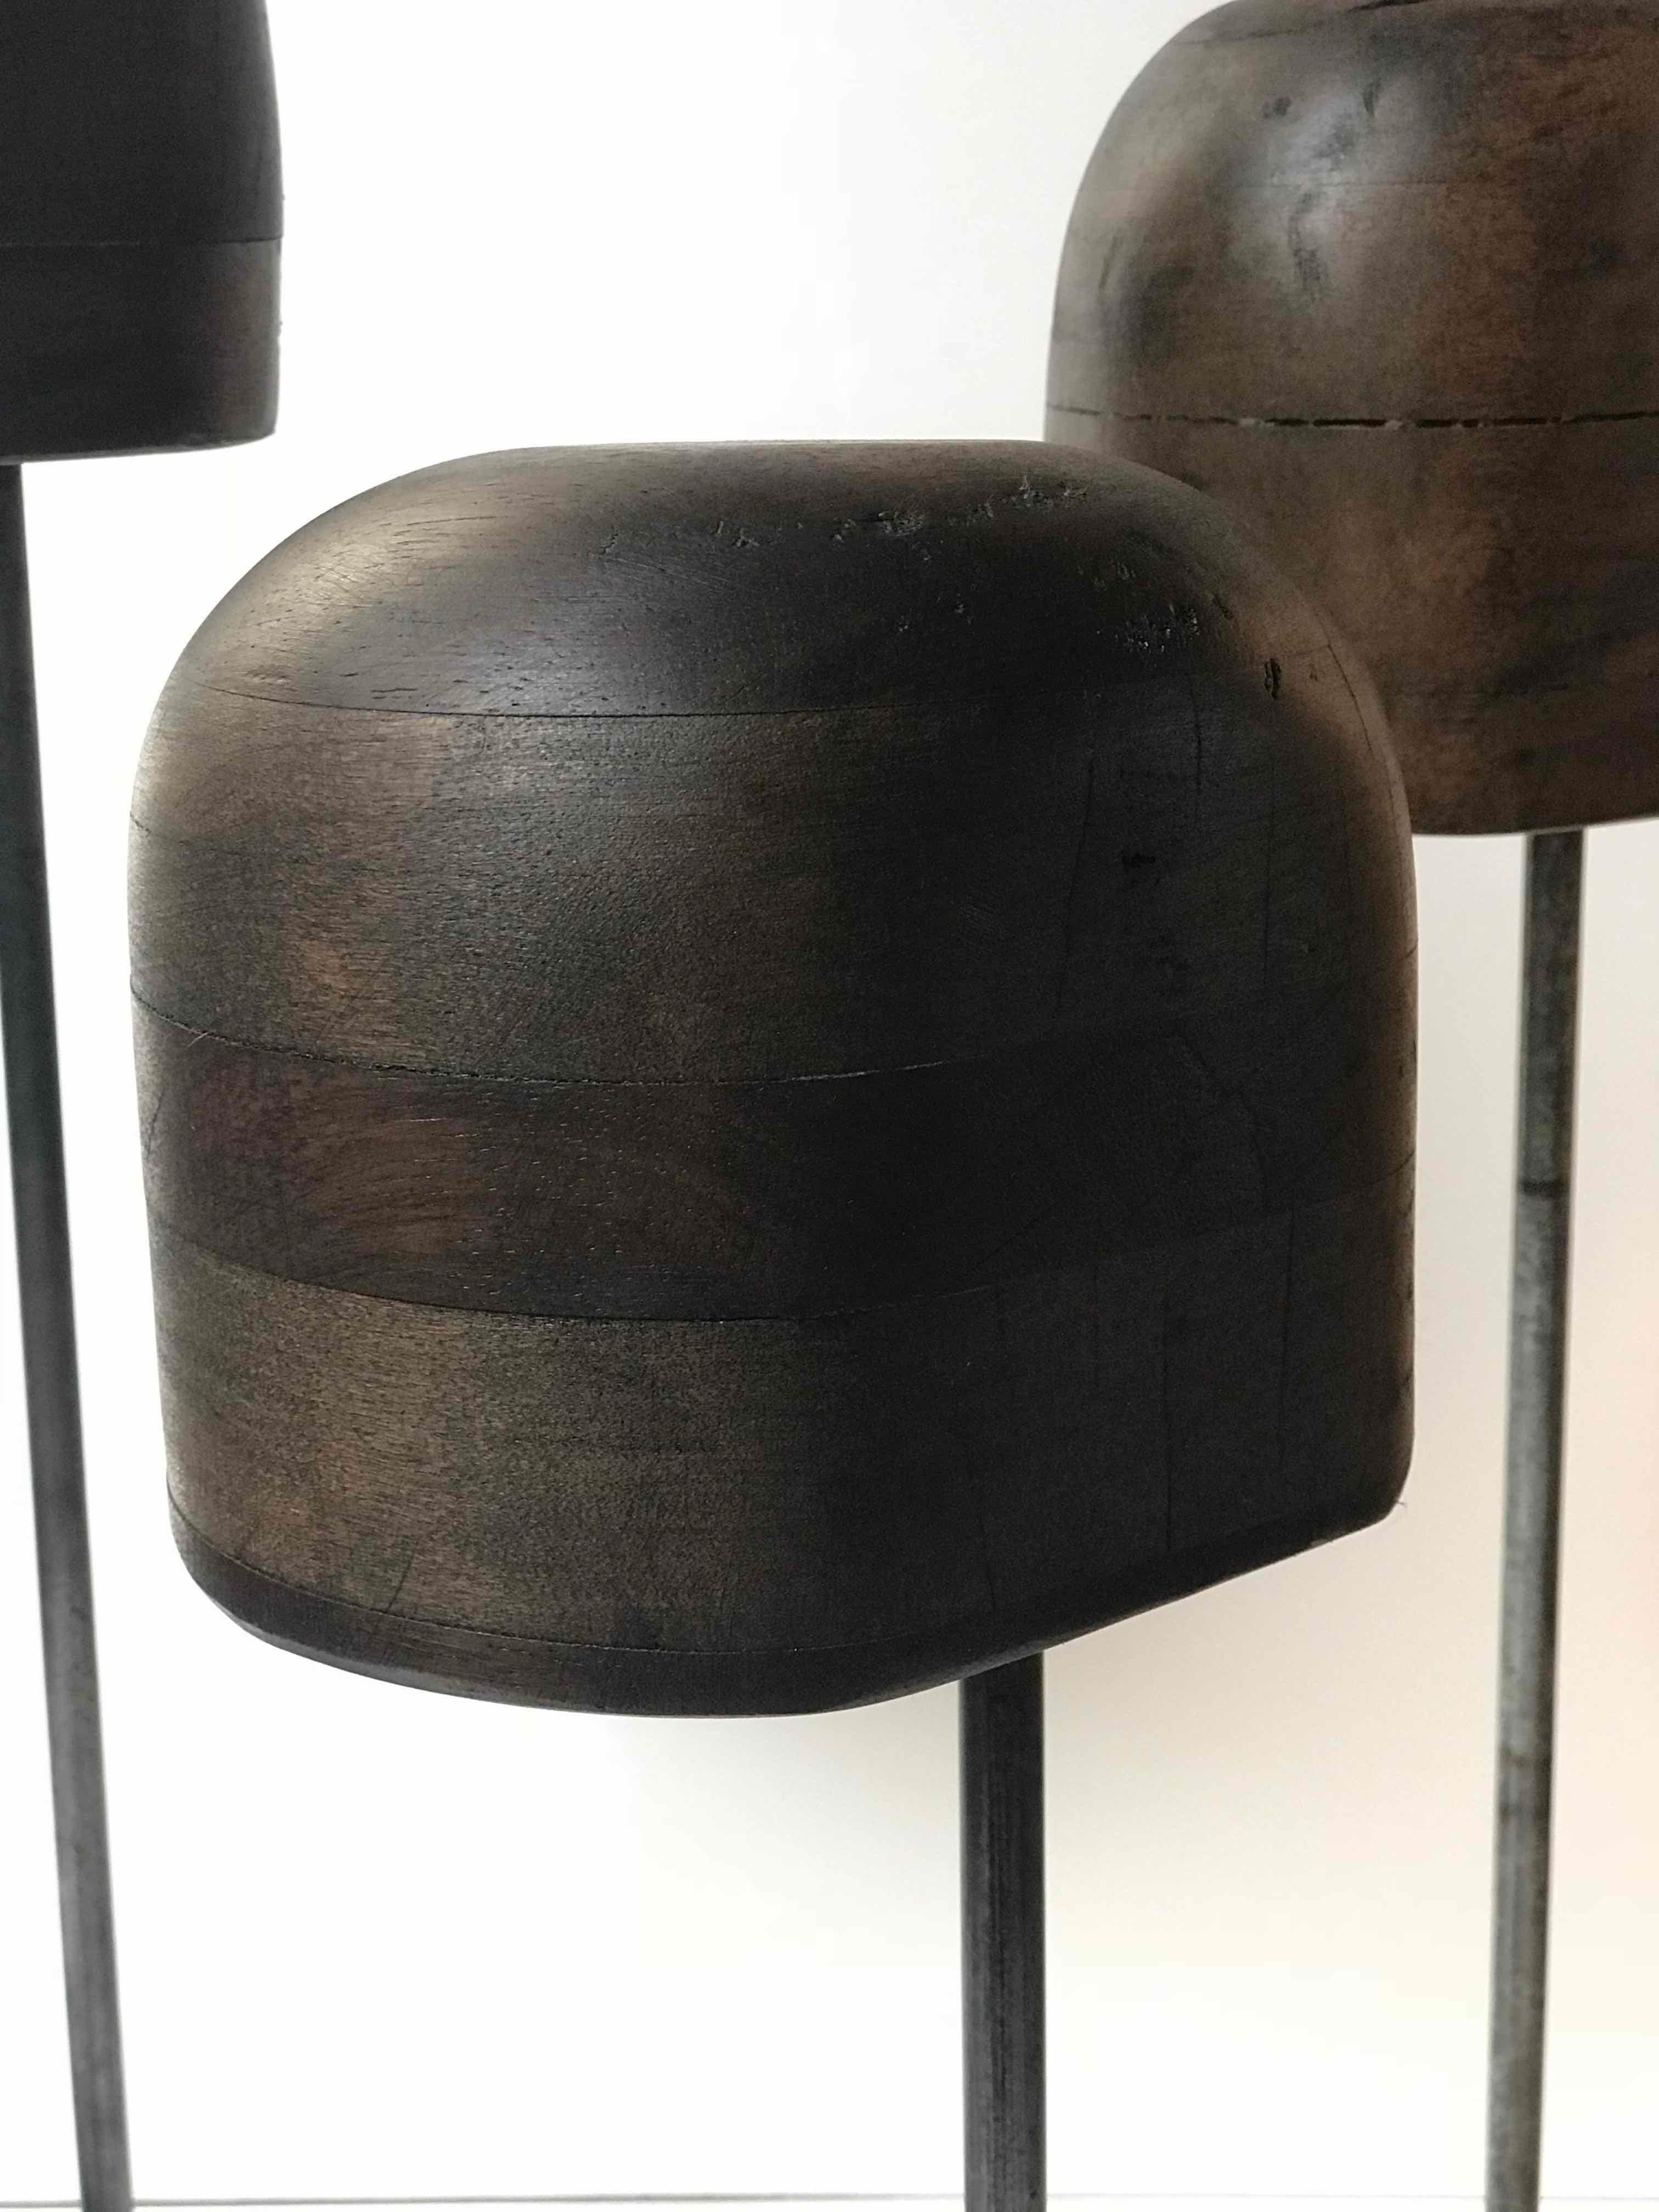 Set of late 19th century wooden hat stands on iron bases from England. 